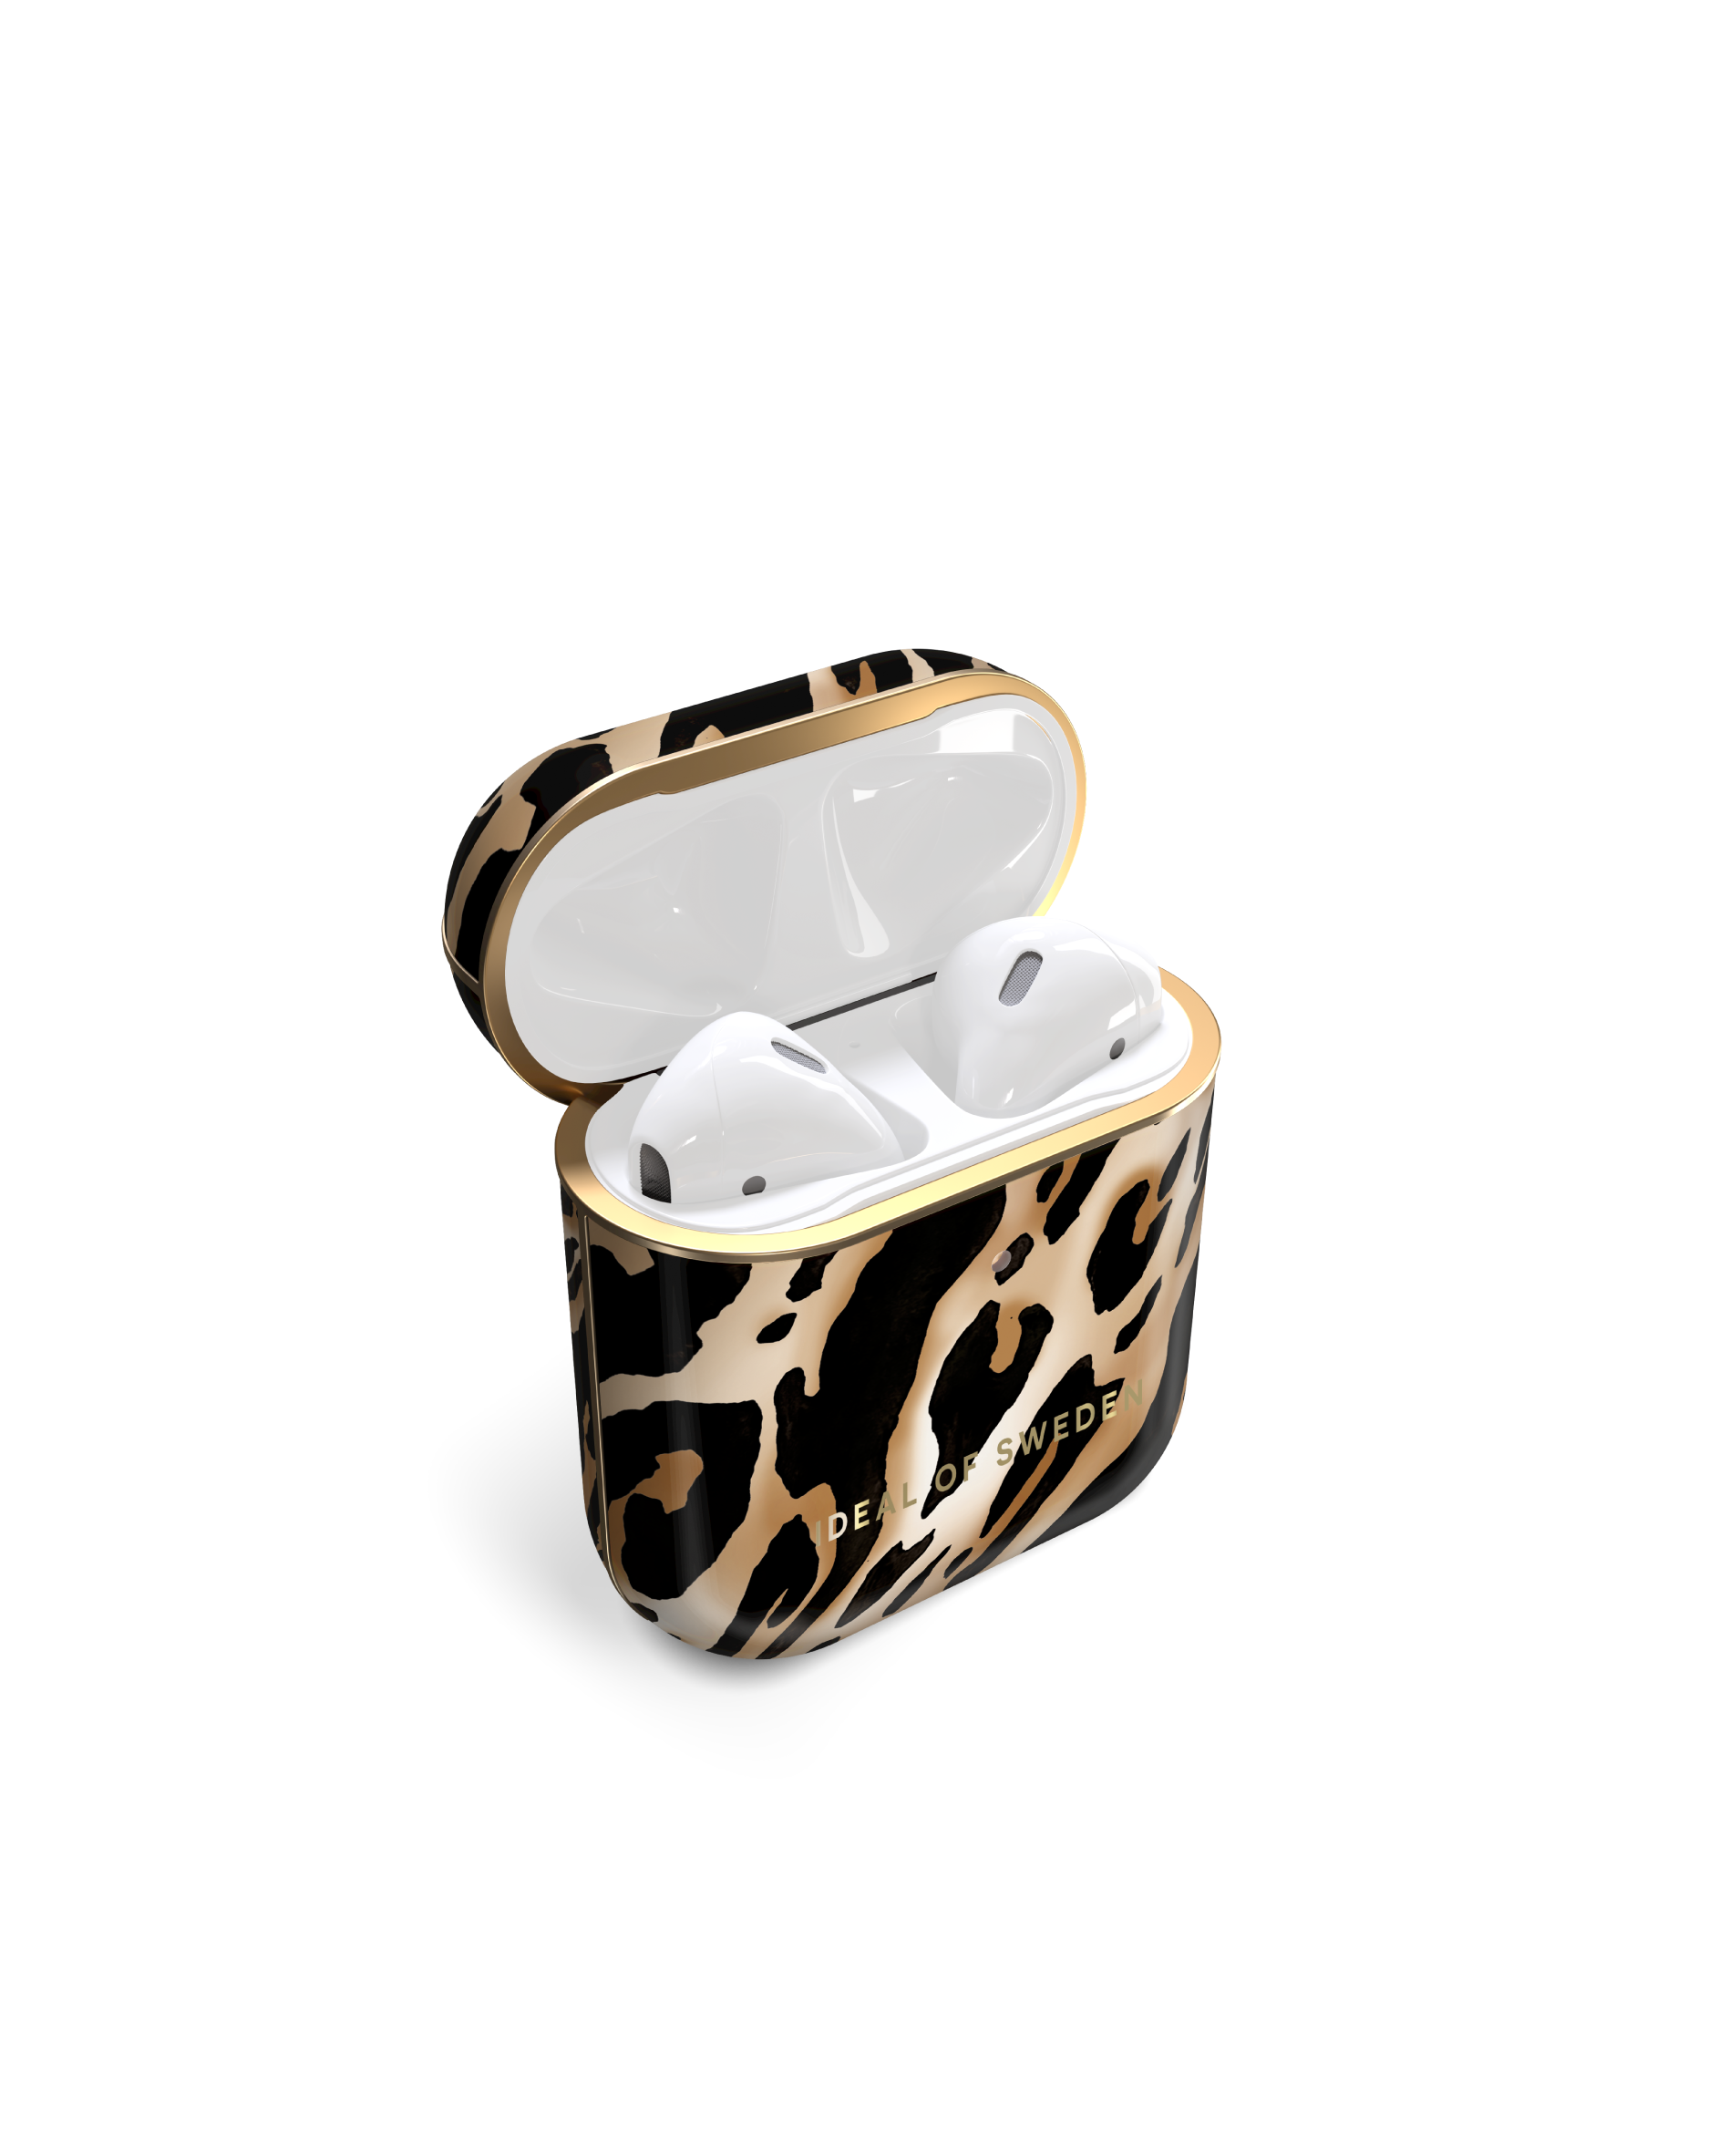 IDEAL OF Full Leopard passend für: IDFAPCAW21-356 SWEDEN Cover Apple Case AirPod Iconic